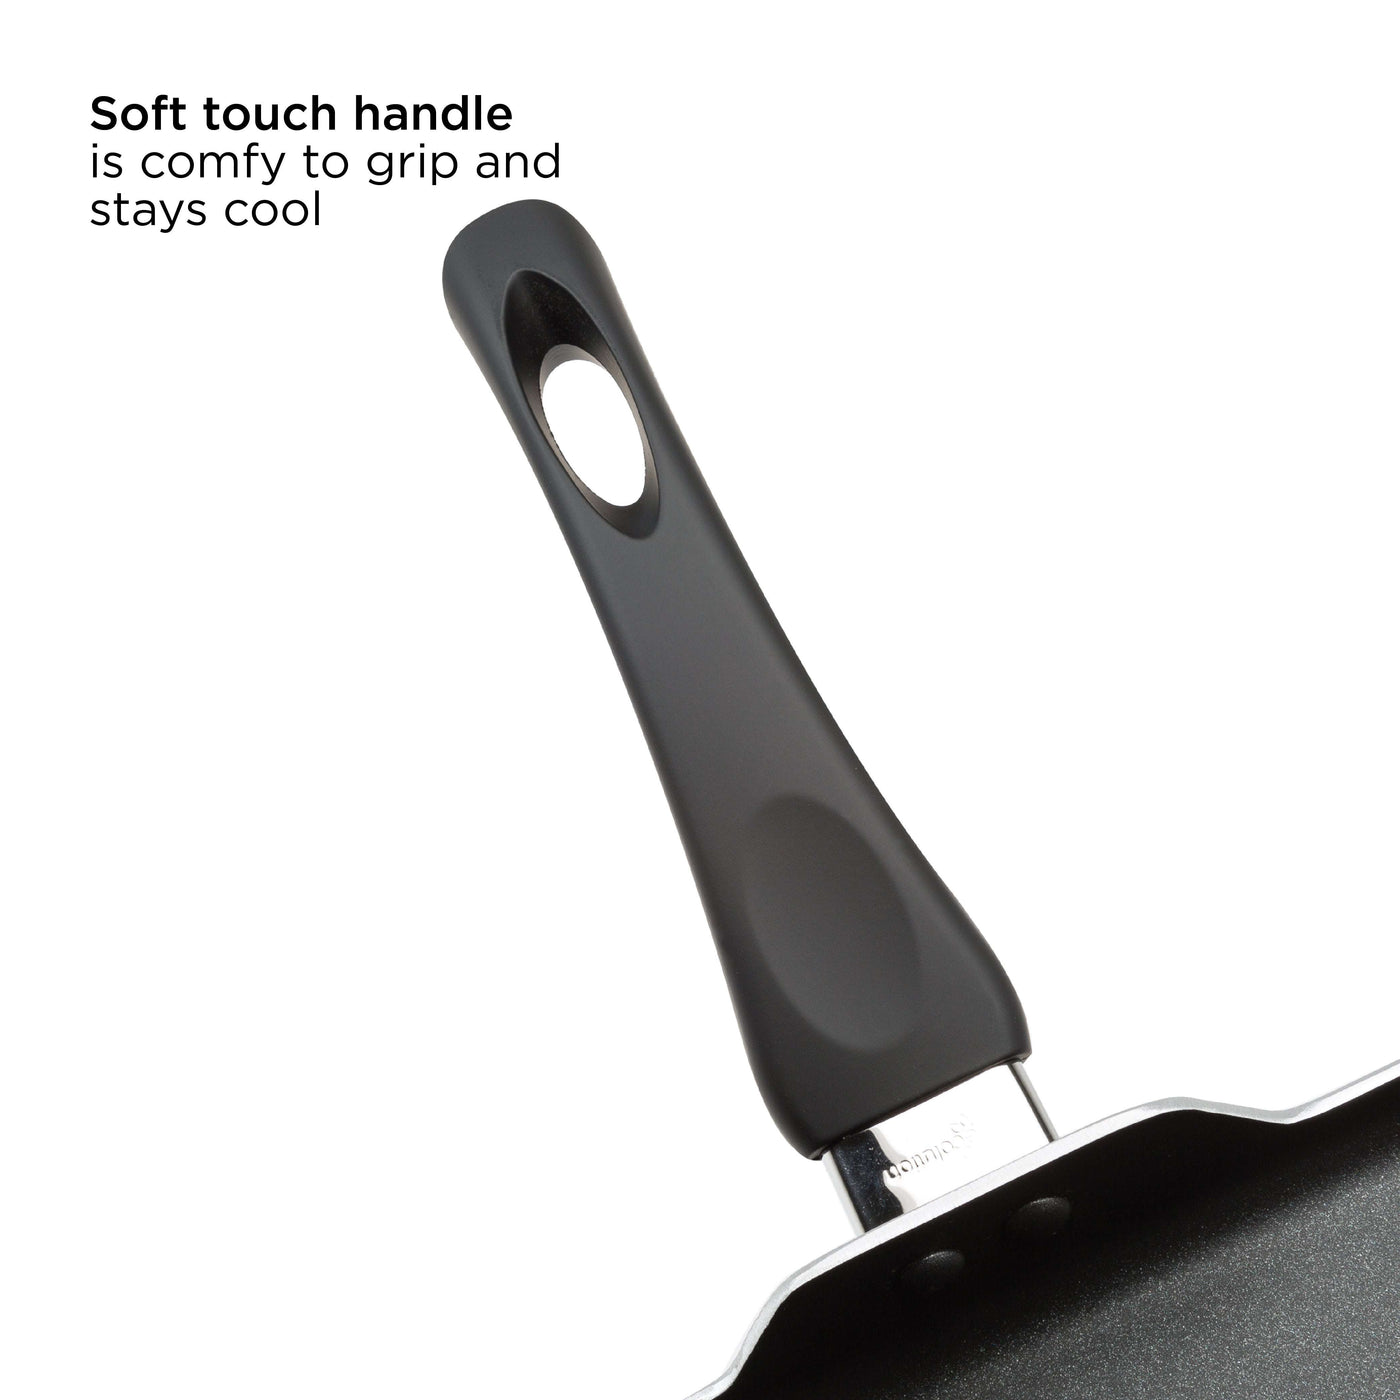 our goods Non-Stick Griddle - Pebble Gray